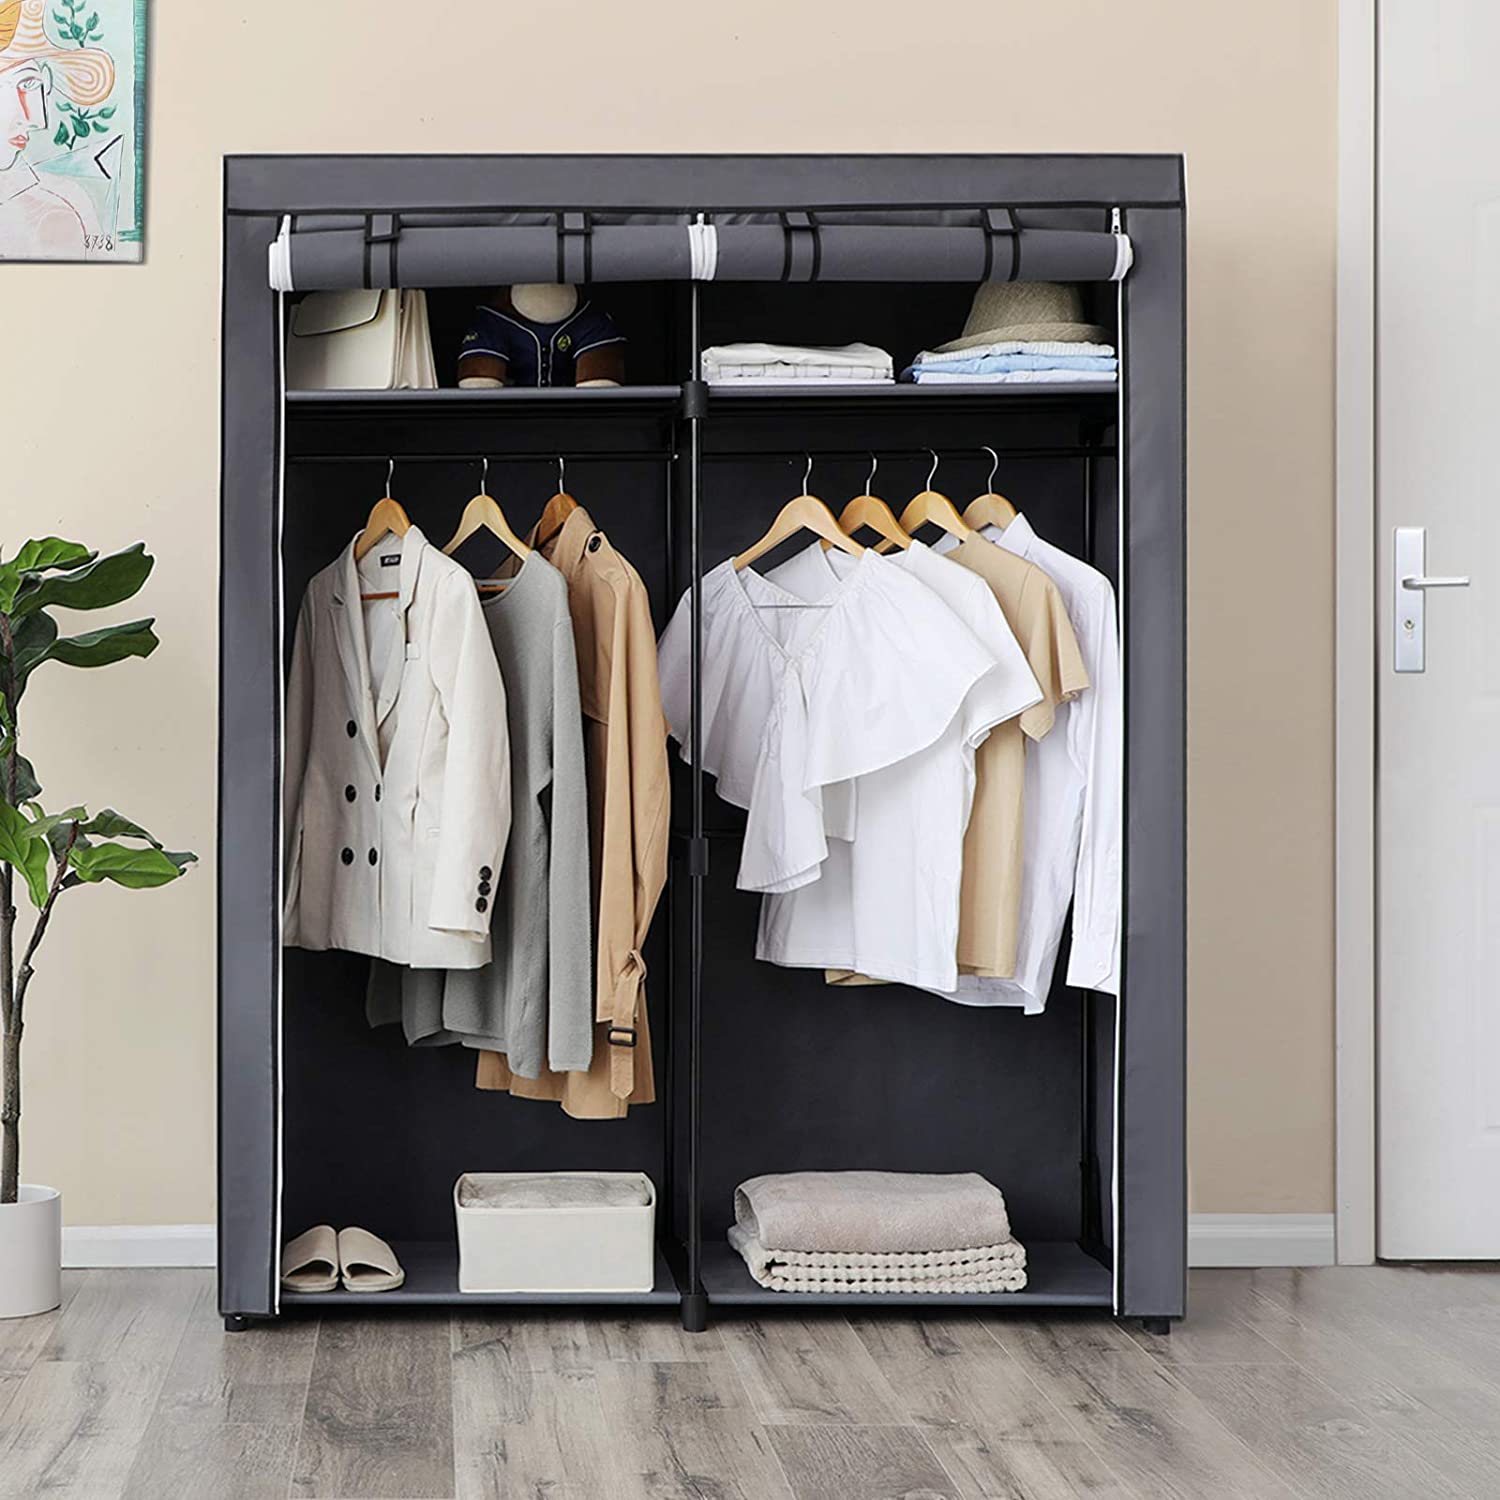 Portable Free-Standing Multi-Purpose Wardrobe with Breathable Non-Woven Fabric Shelves